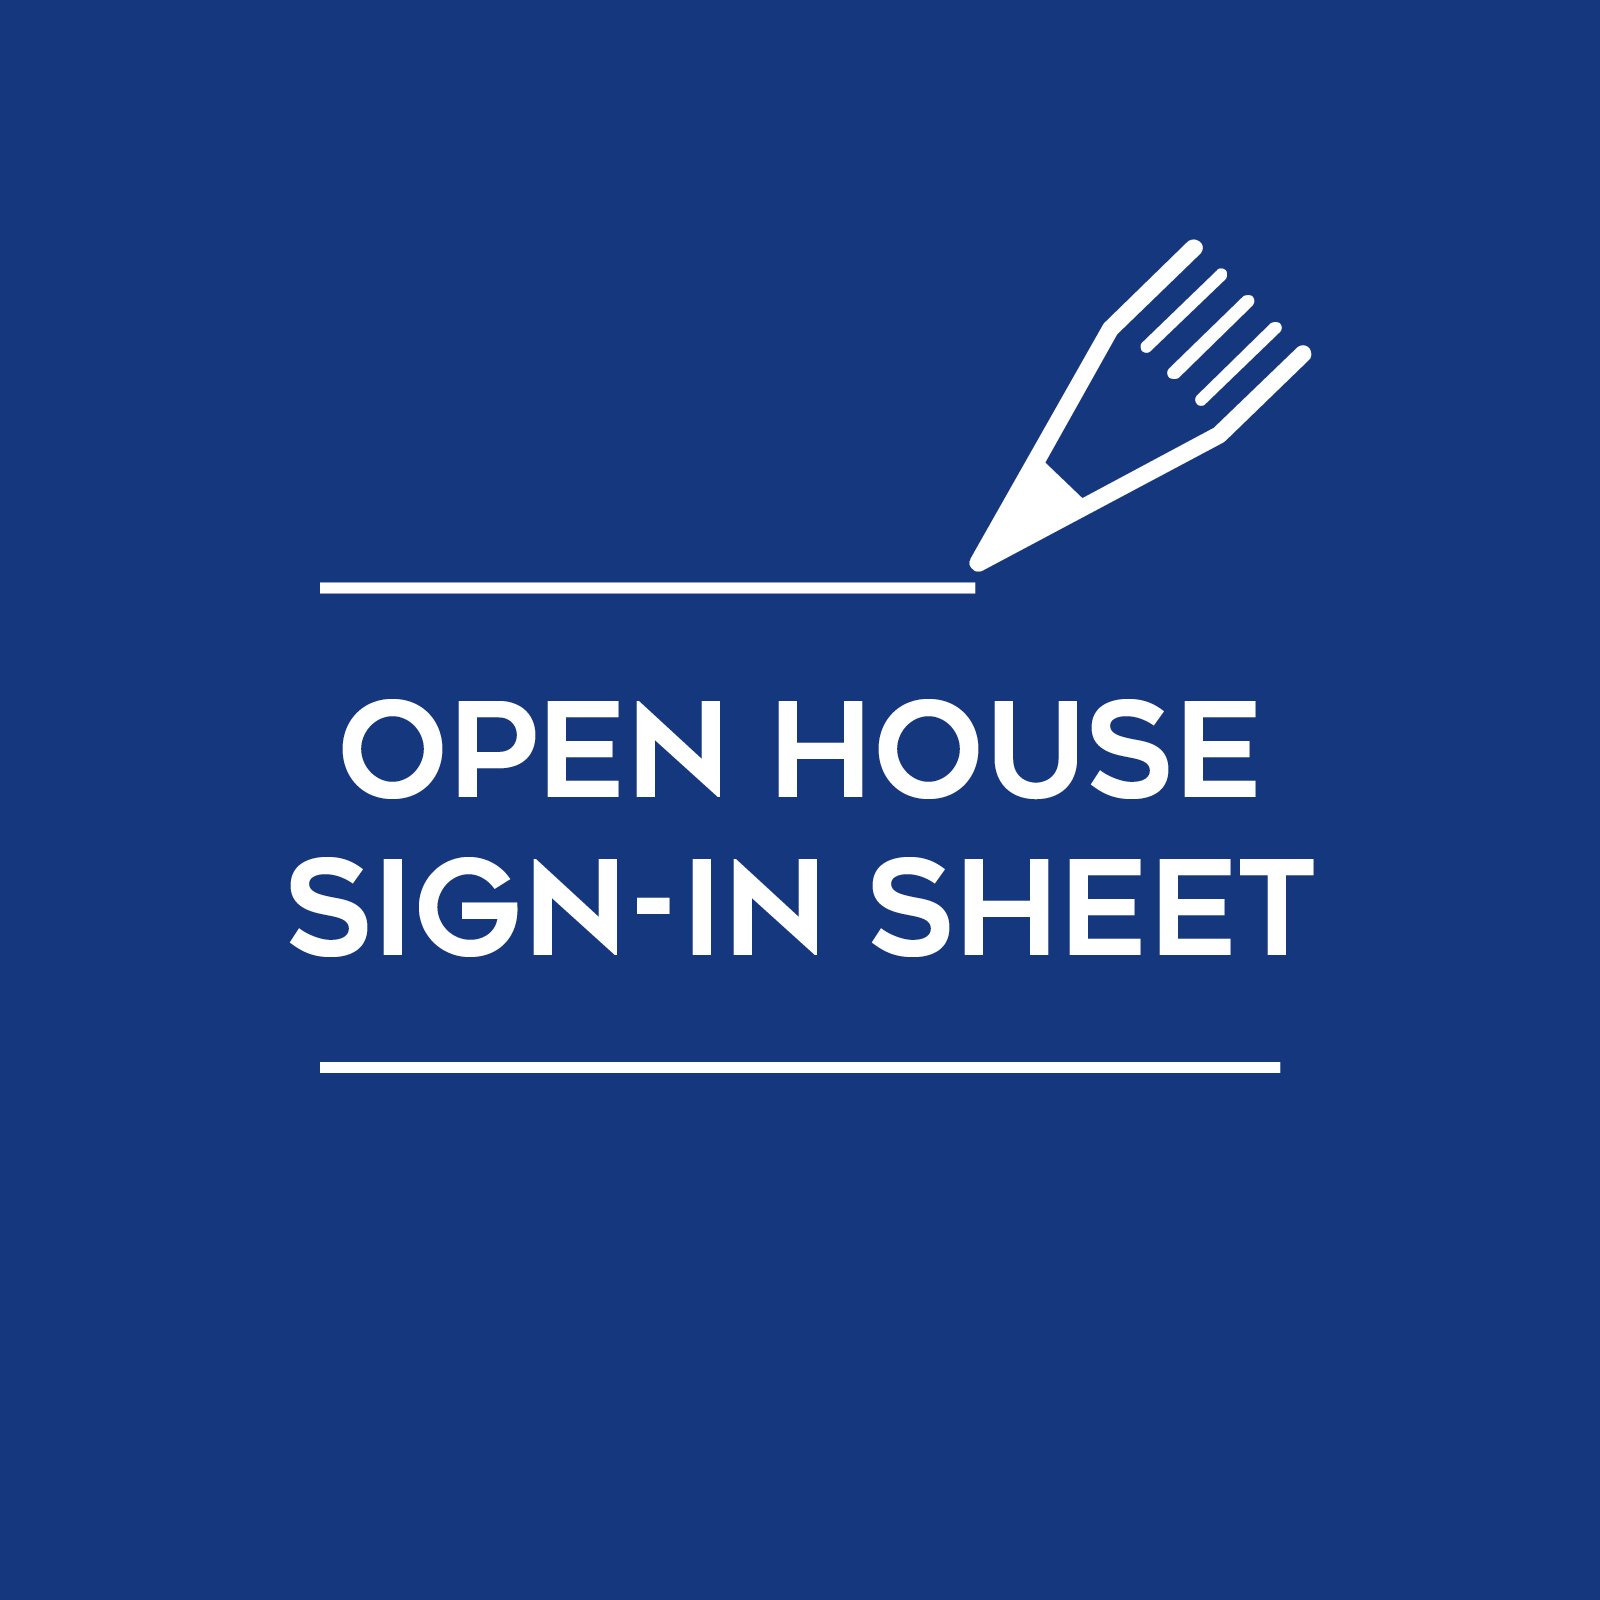 Open House Sign-In